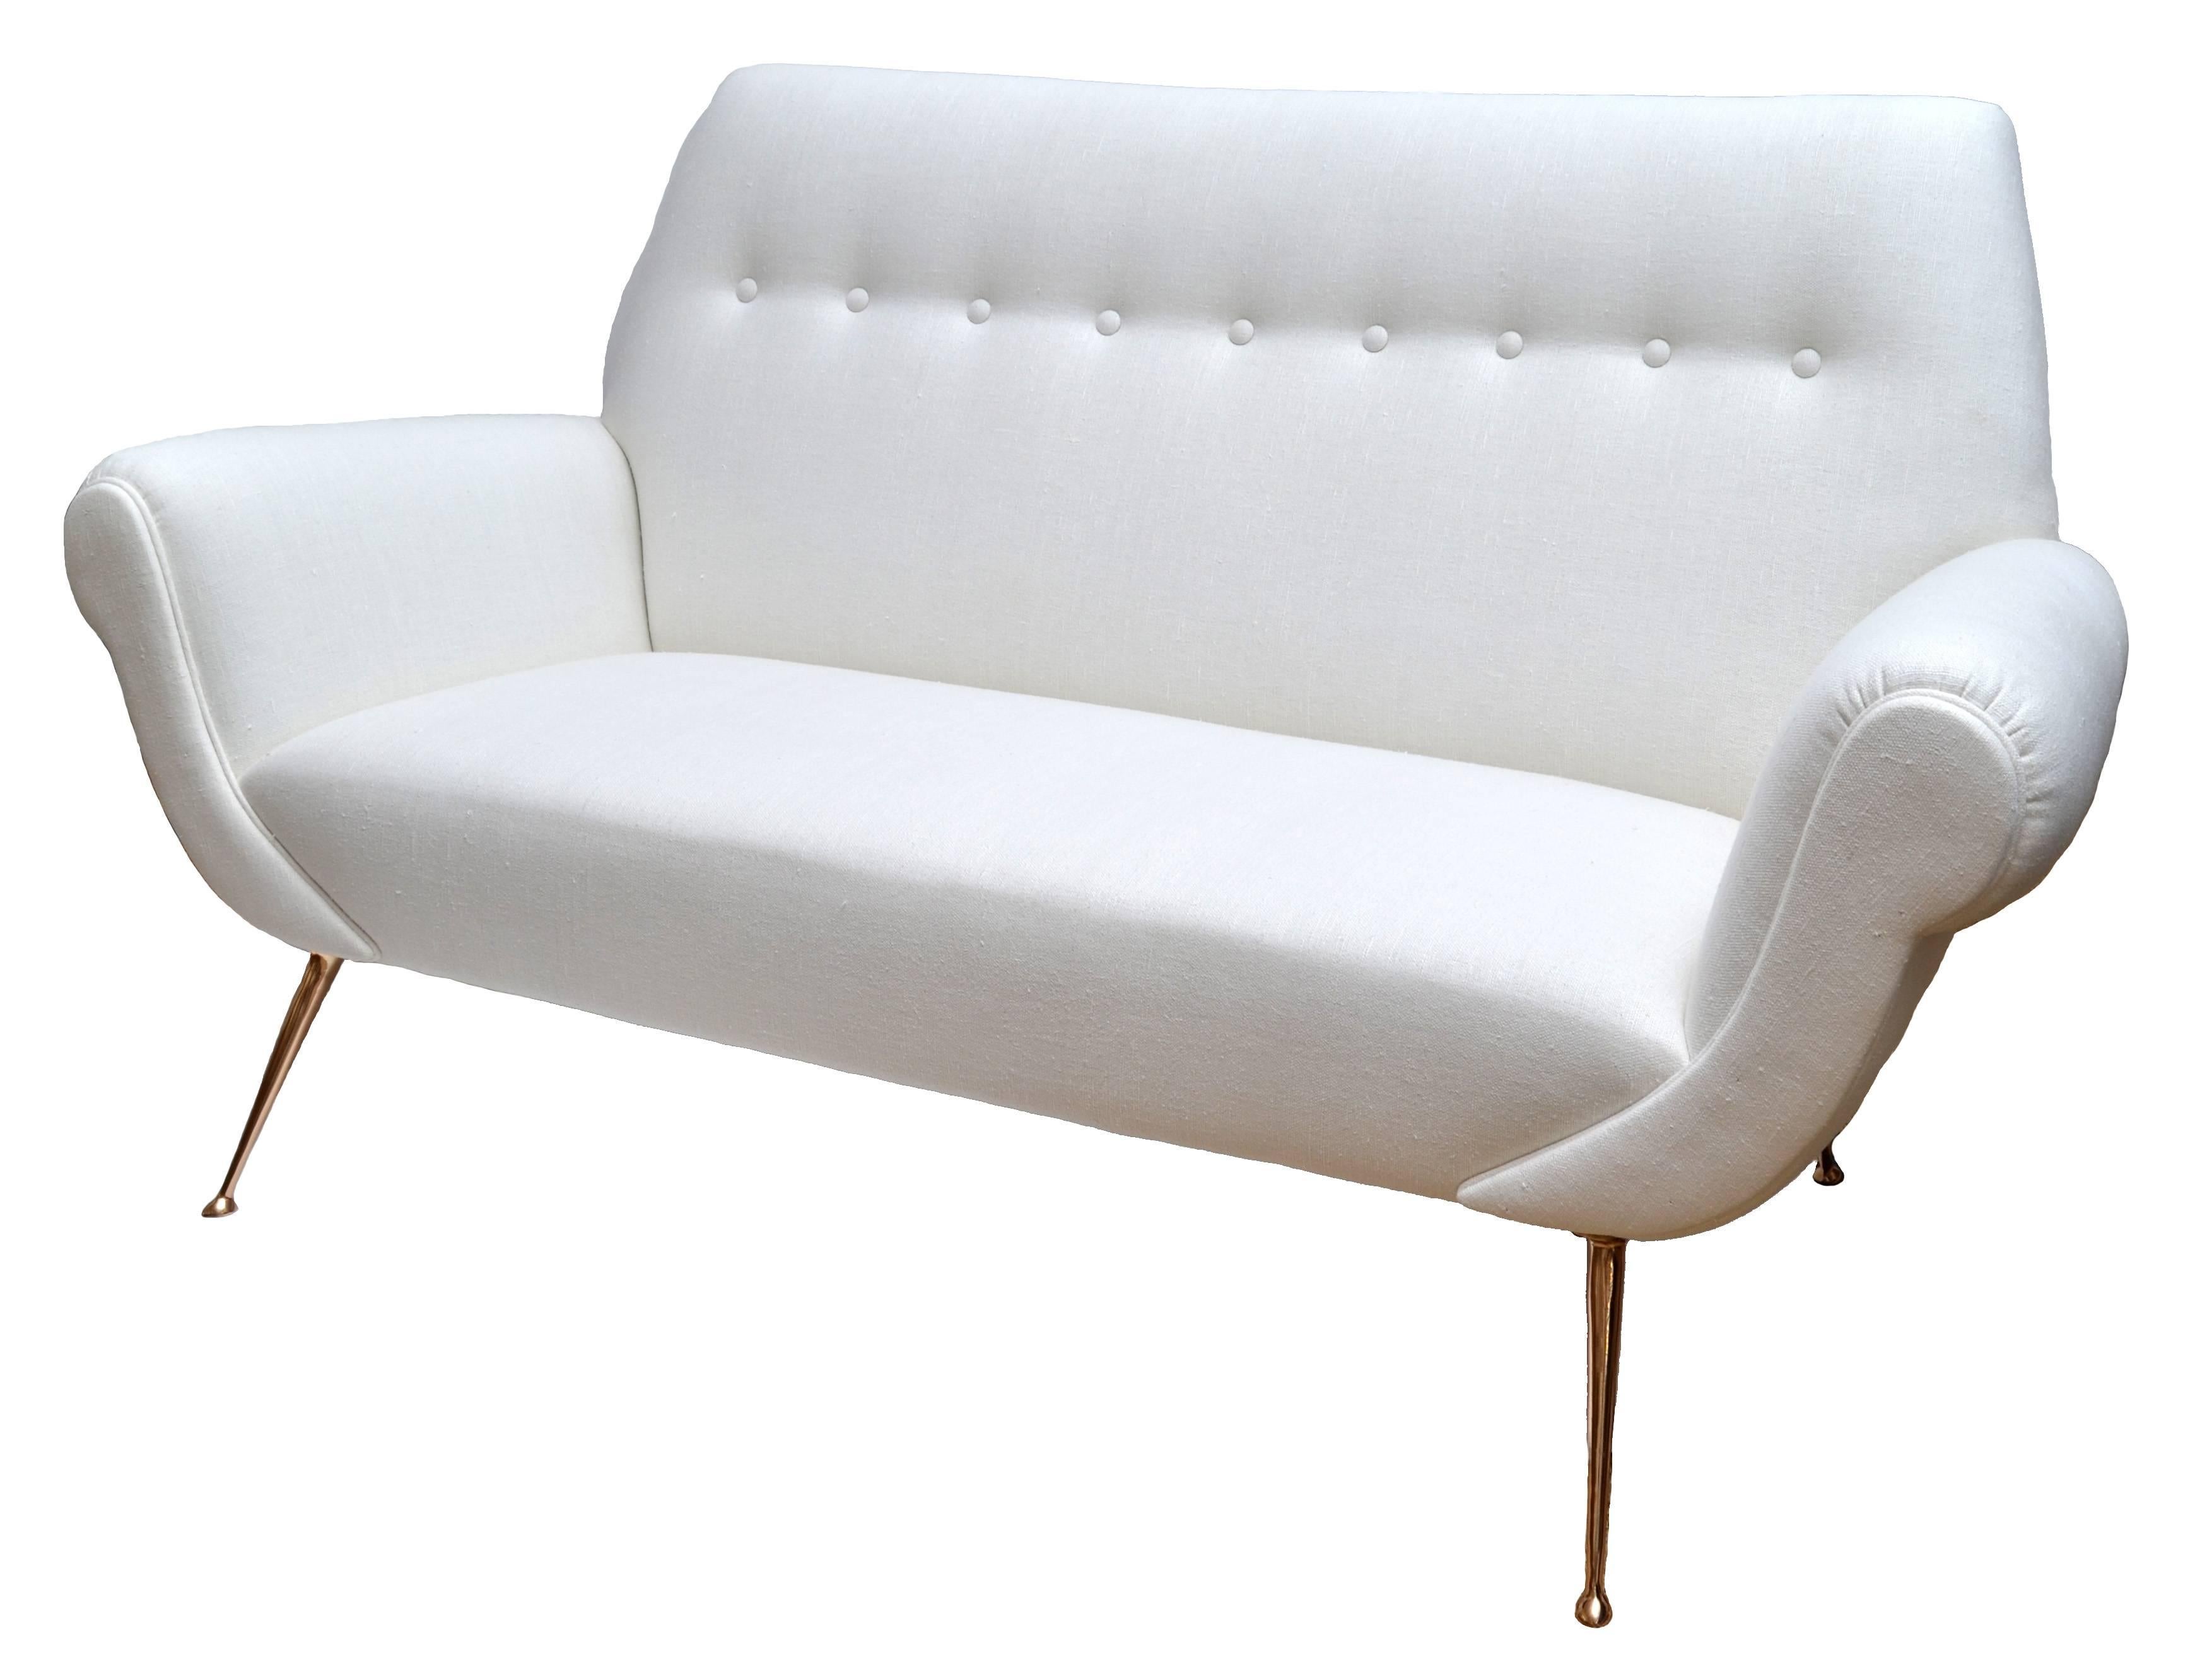 This 1950 Italian sofa was designed by Gigi Radice and manufactured by Minotti.
New white upholstery, square tuxedo cut backrest, with button tufted back, tight seat, rolled arms and self-welting, with solid brass legs.
This sofa is ready to put